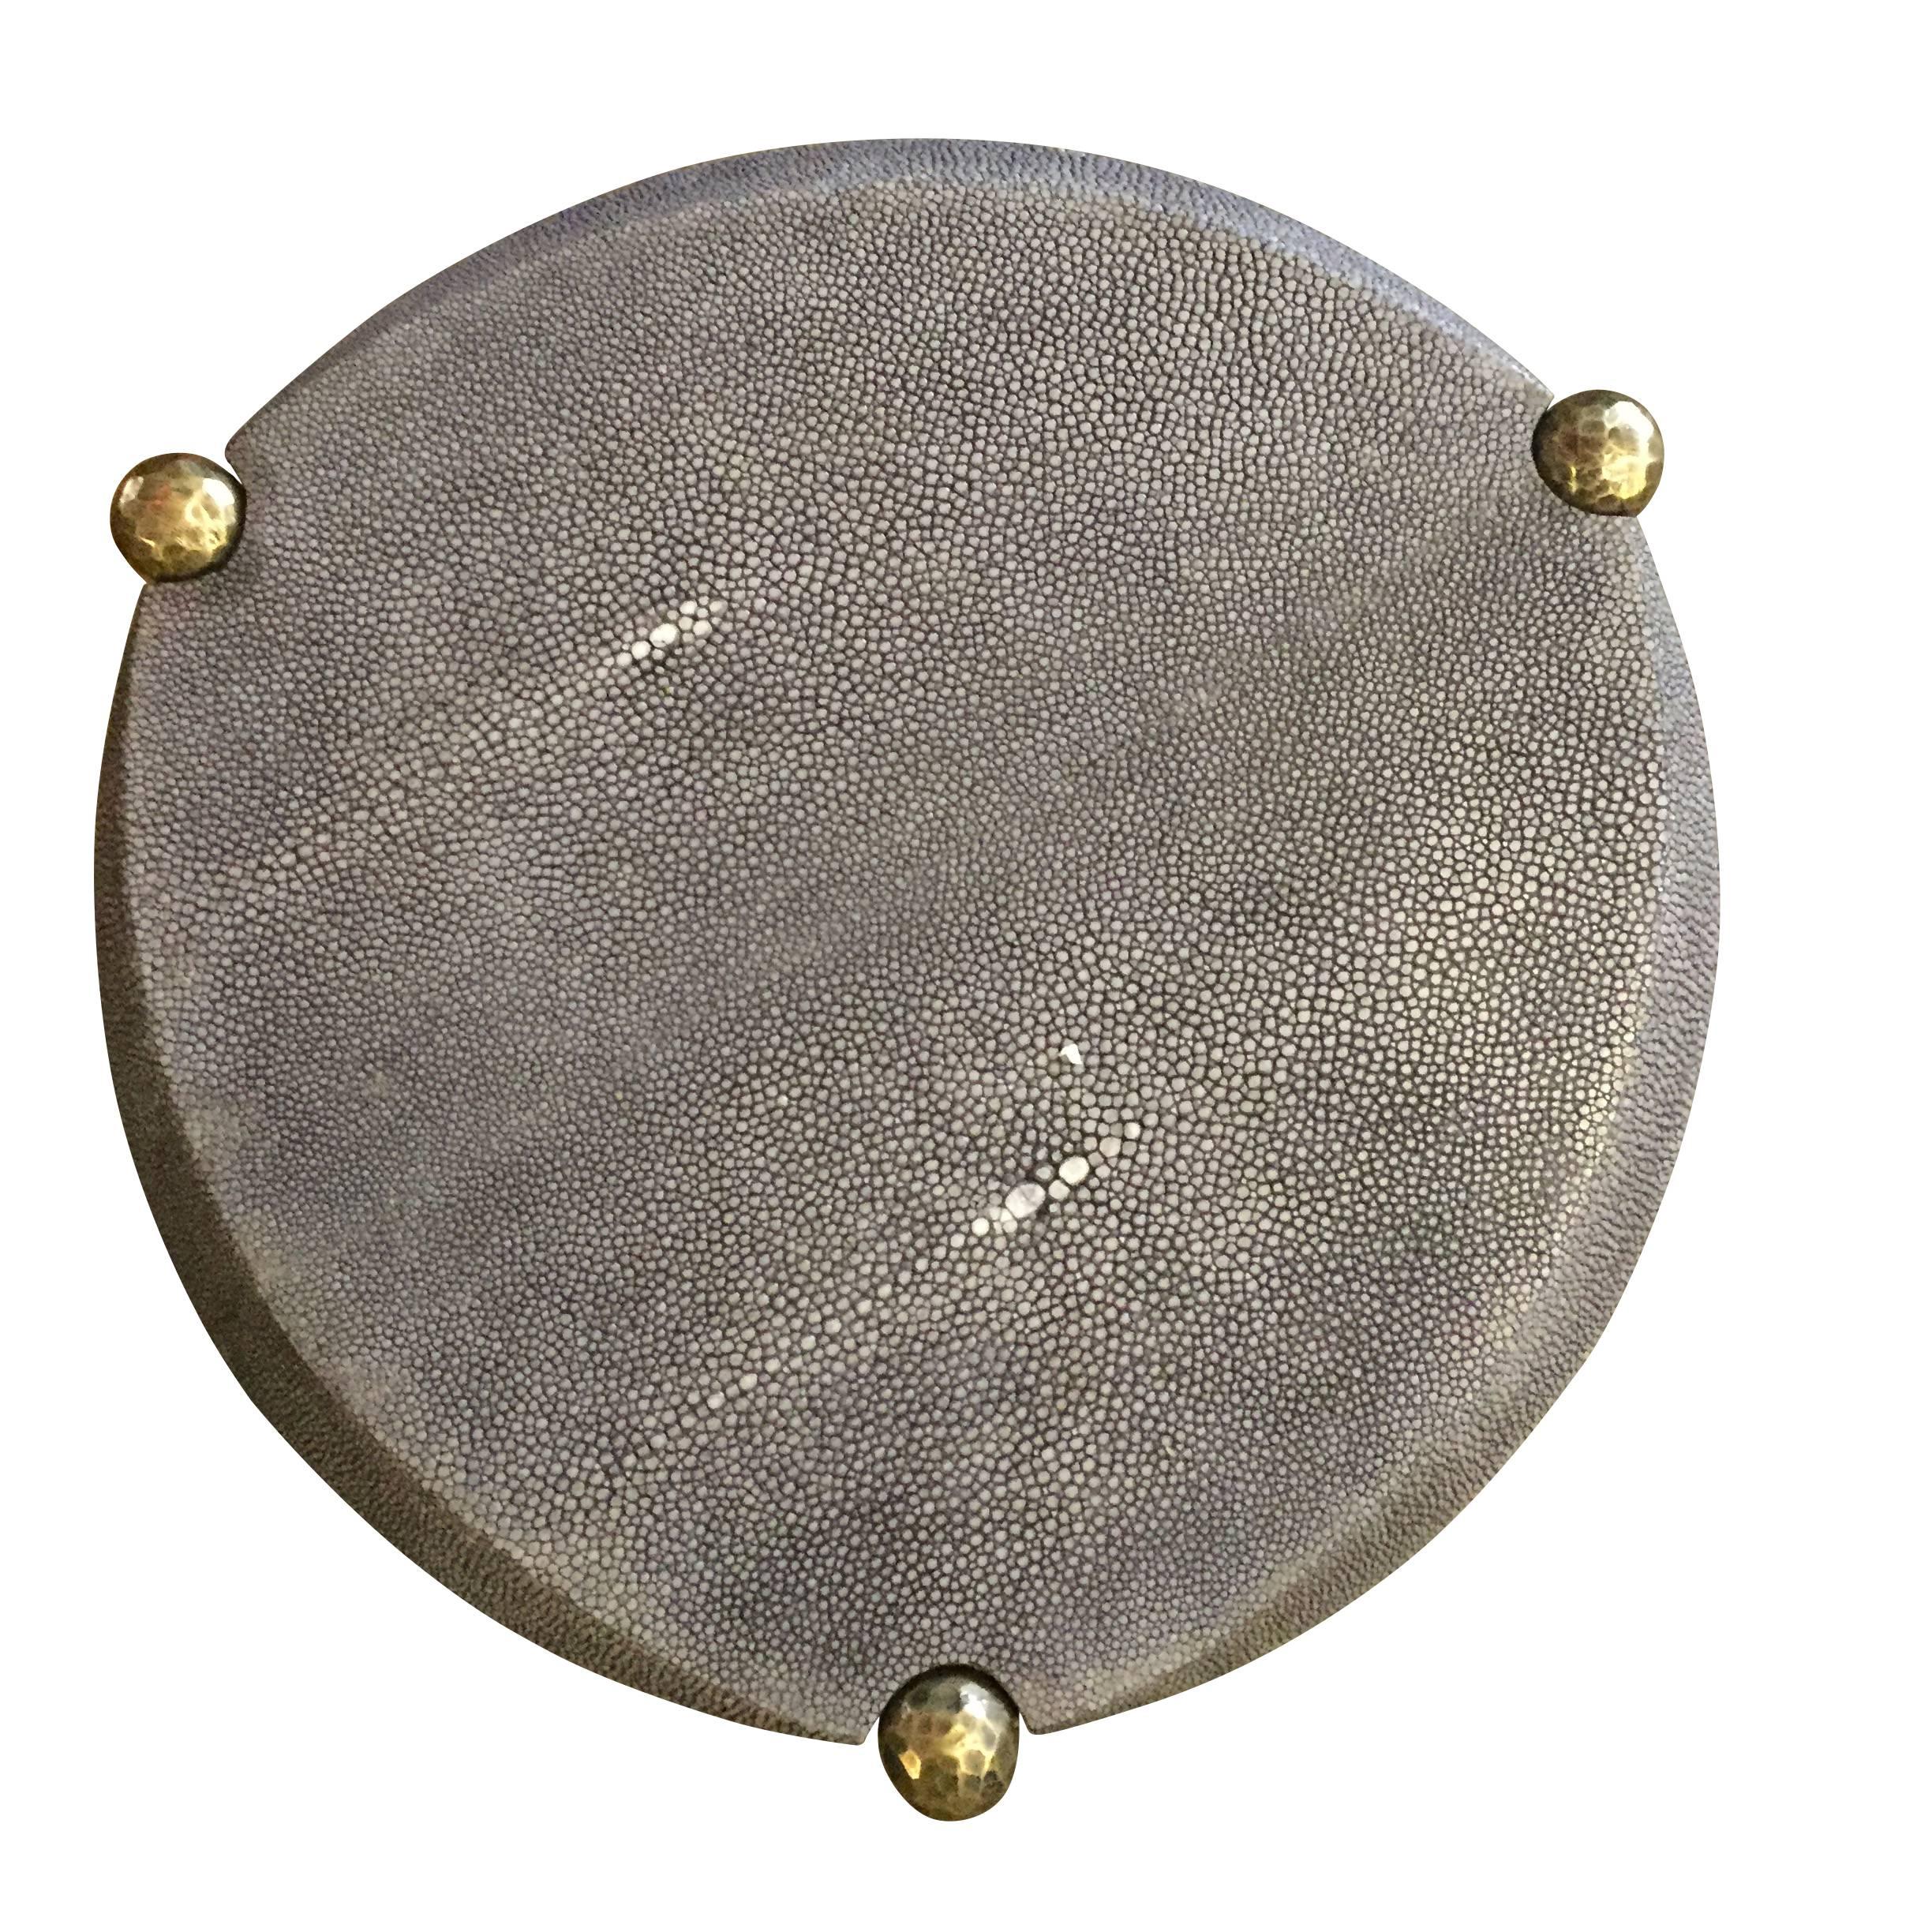 Contemporary French round grey shagreen top with hammered bronze base cocktail table.
Tapered legs and decorative criss cross base.
ARRIVING NOVEMBER 2018

 